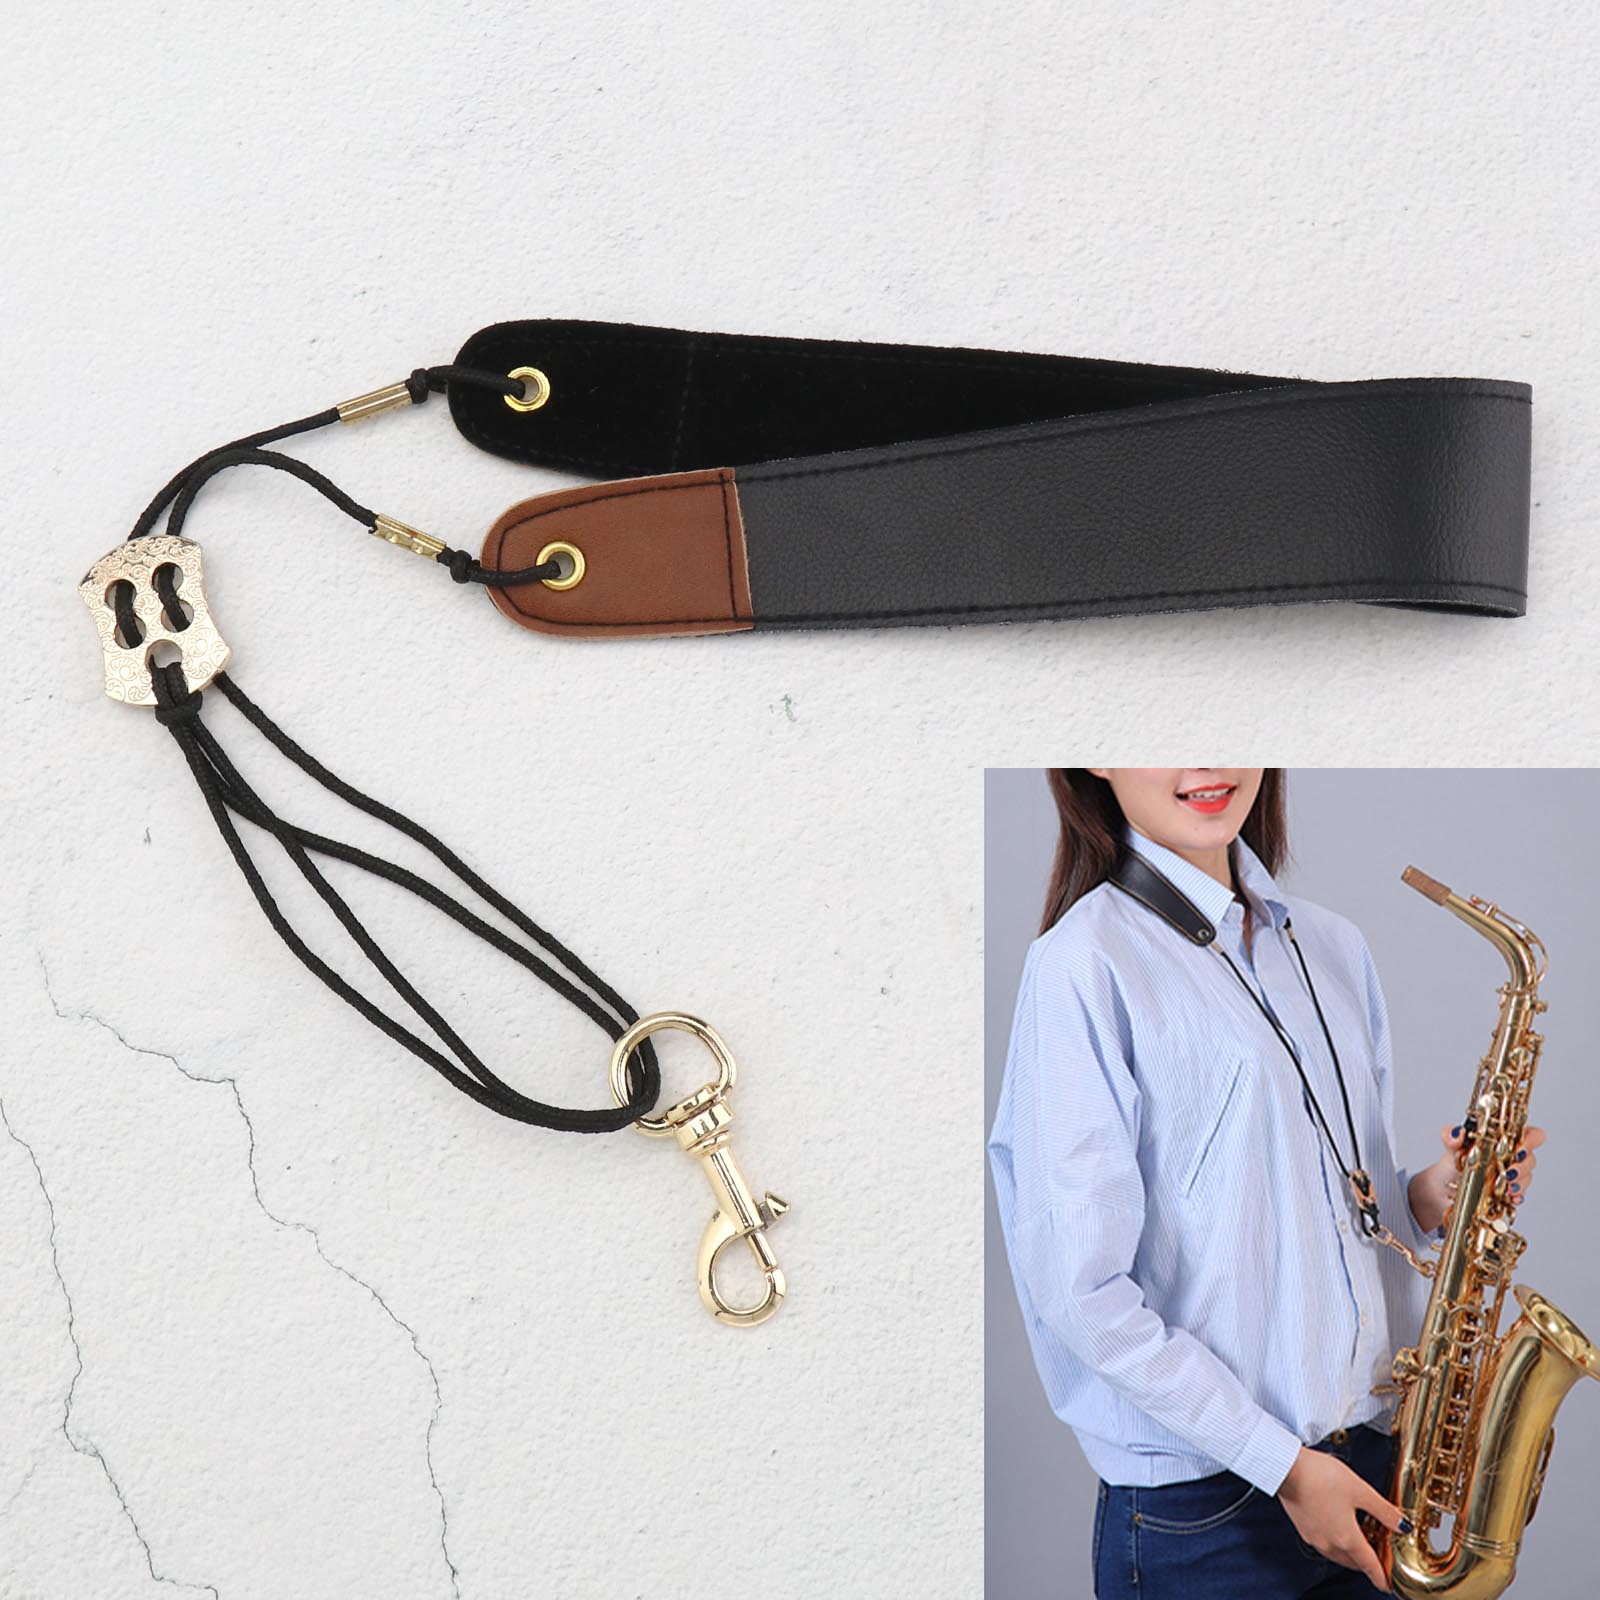 Saxophones Strap With Metal Hook Saxophone Accessories Adjustable Neck Belt Padded for Saxophones Horns Bass Clarinets,Oboes and More